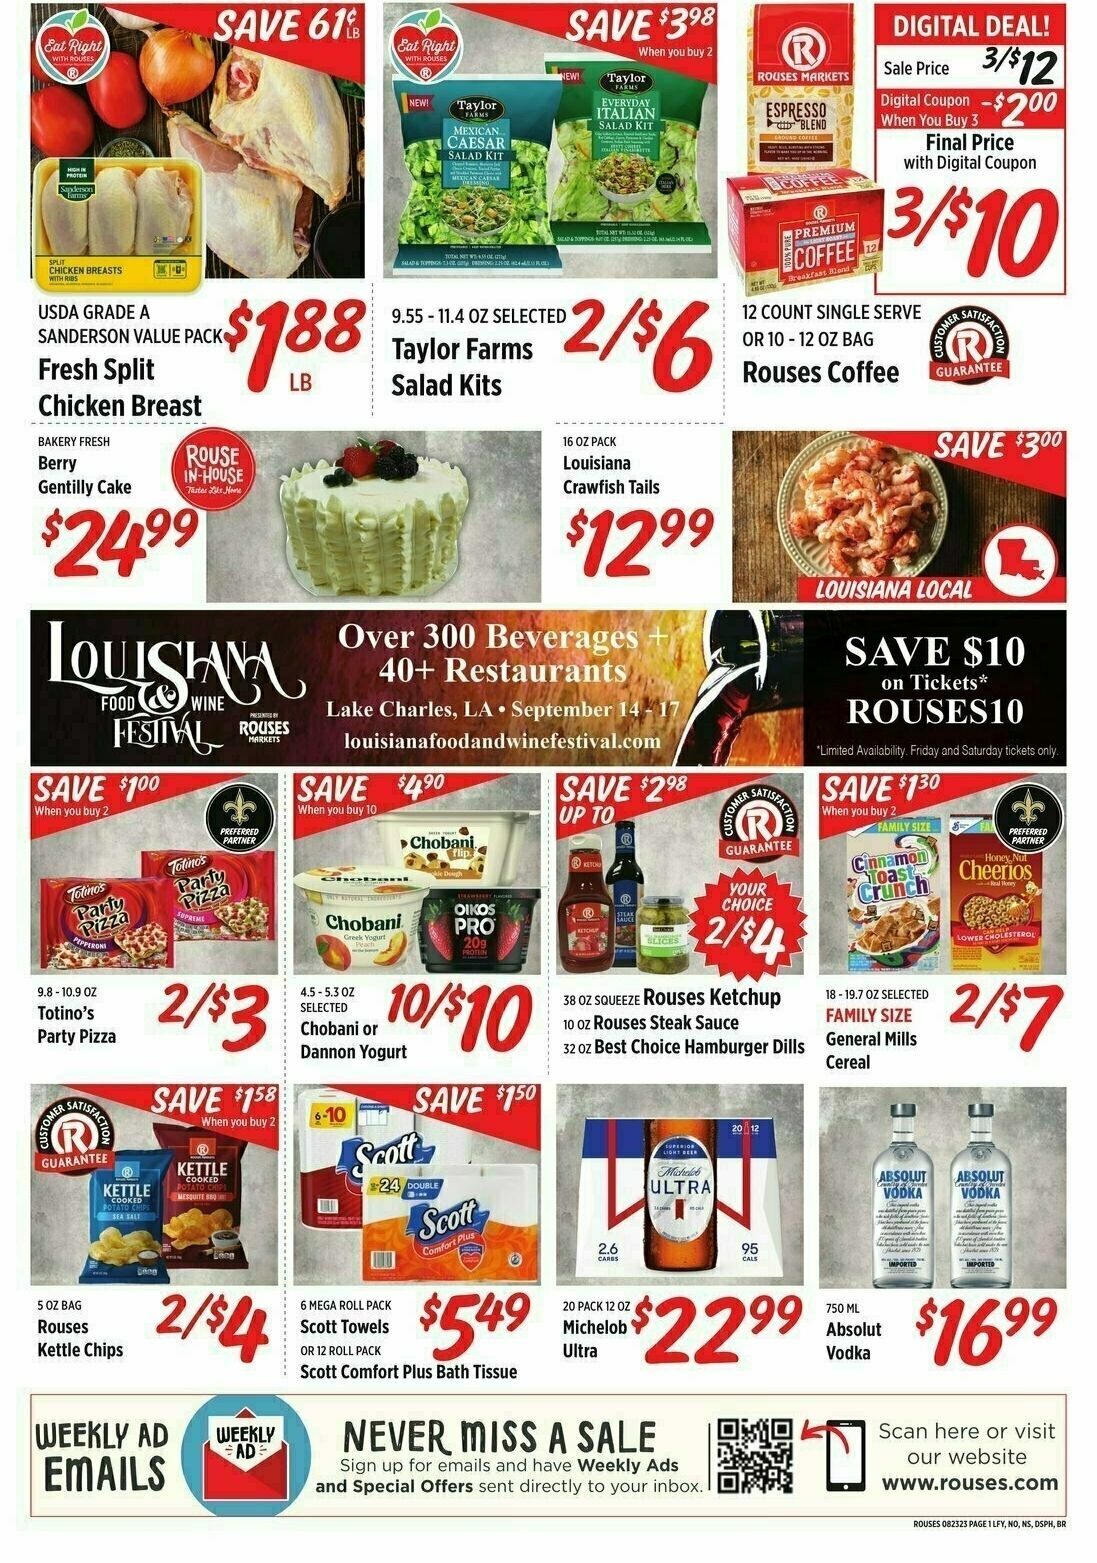 Rouses Markets Weekly Ad from August 23